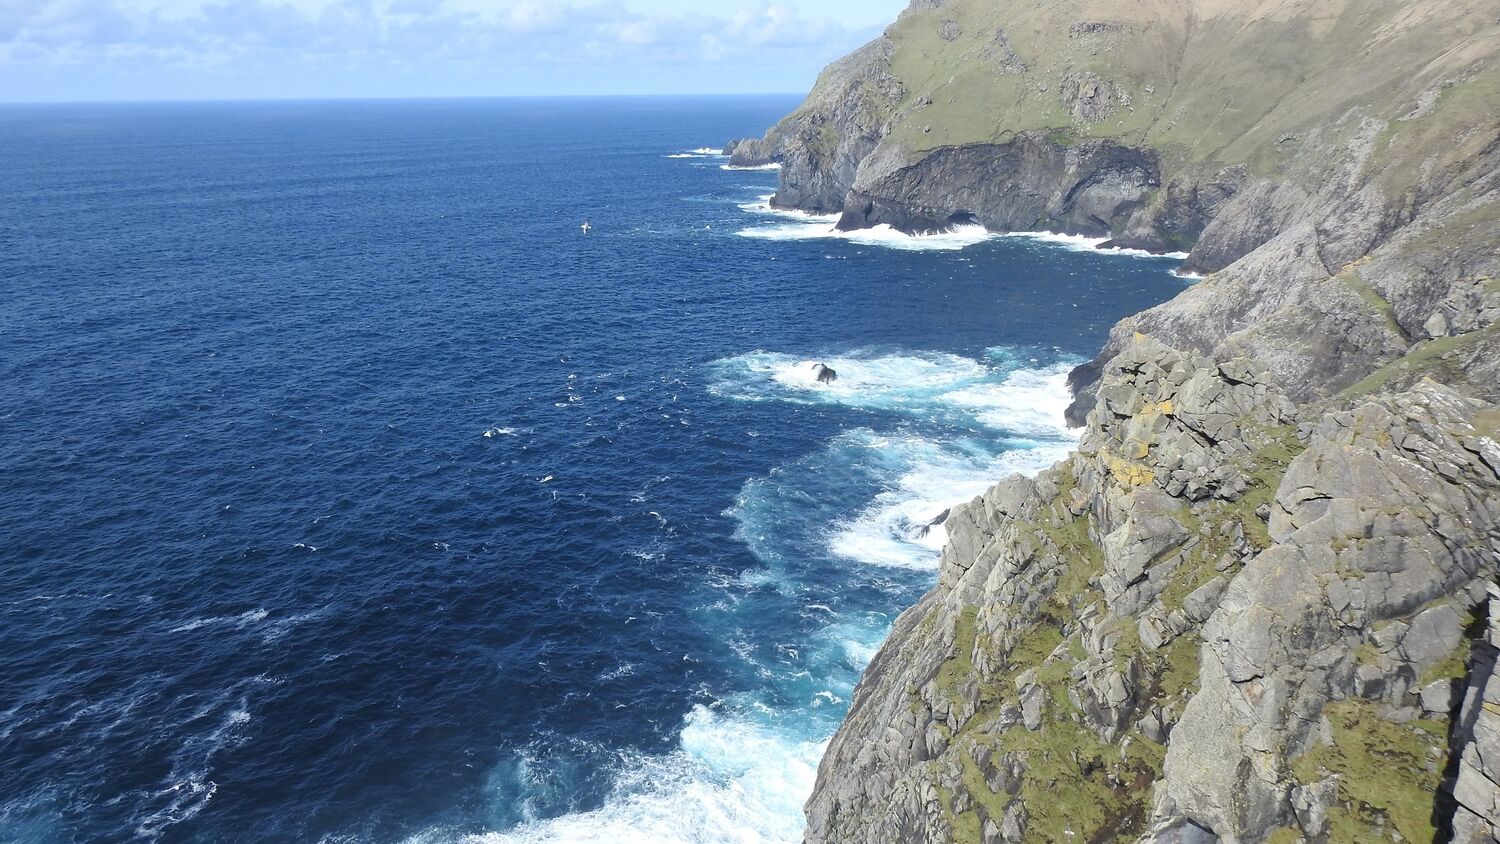 A view of the rocky cliffs of St Kilda. The deep blue sea on the left is crashing into the rocks, with a wide strip of white breakers. A seabird wheels in the air close to shore.